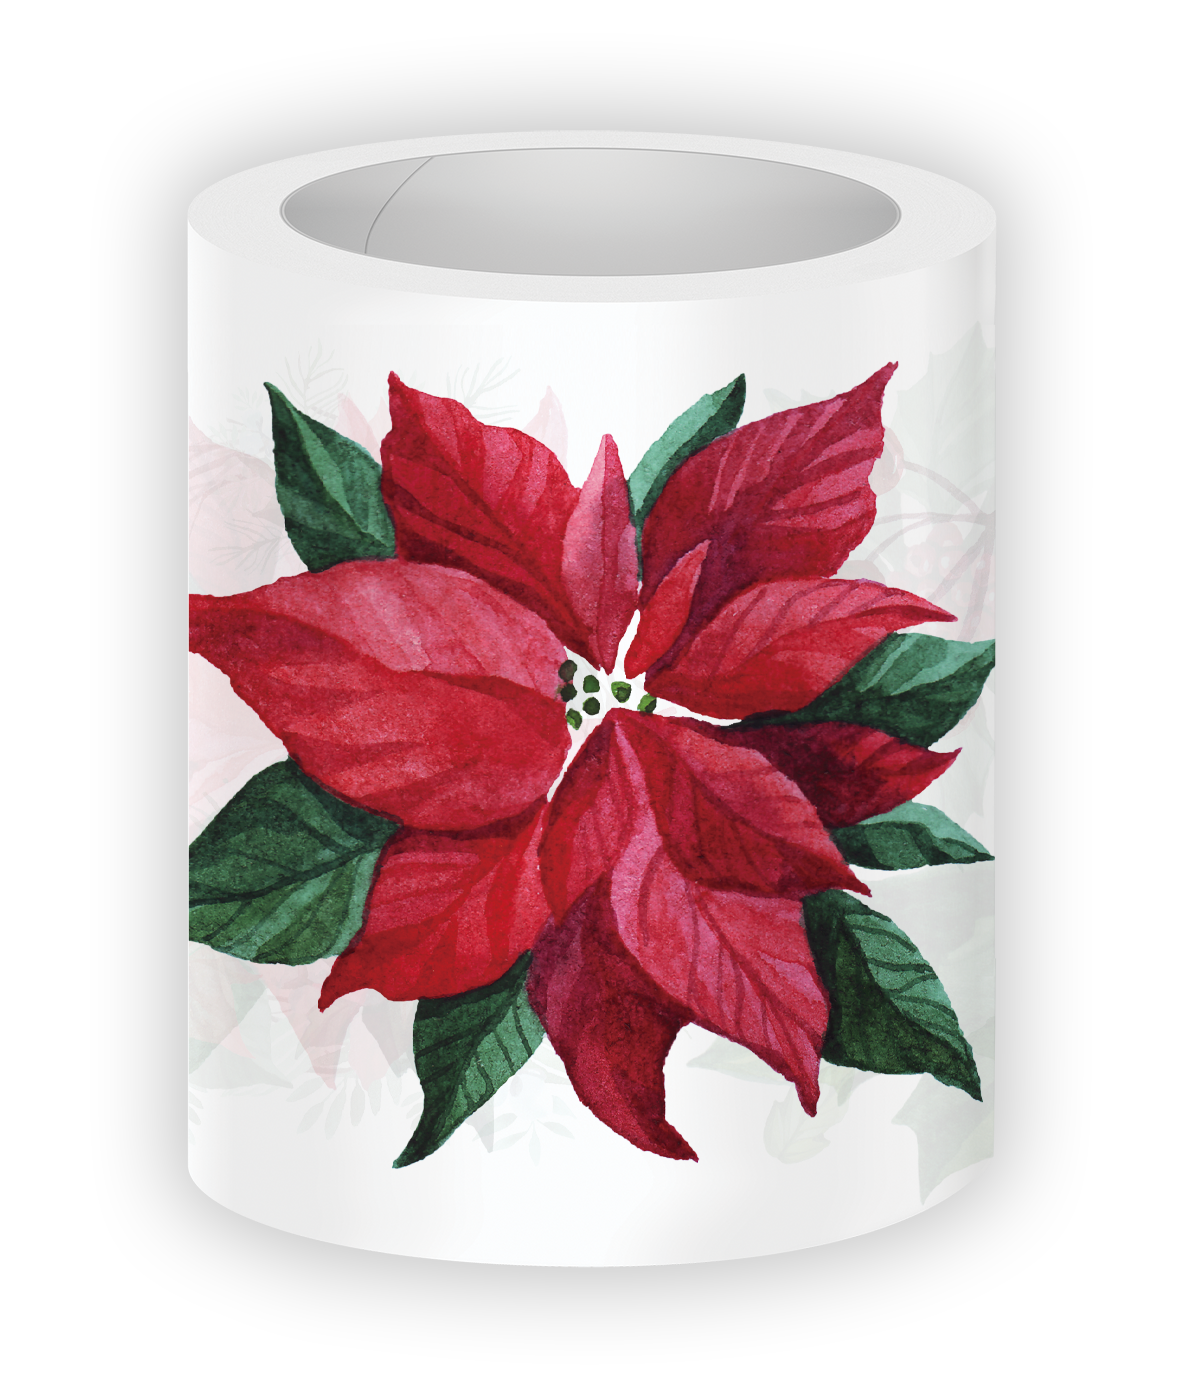 Christmas Flowers PET Tape (updated version 2.0)[Holiday 2023] (Set of 6)